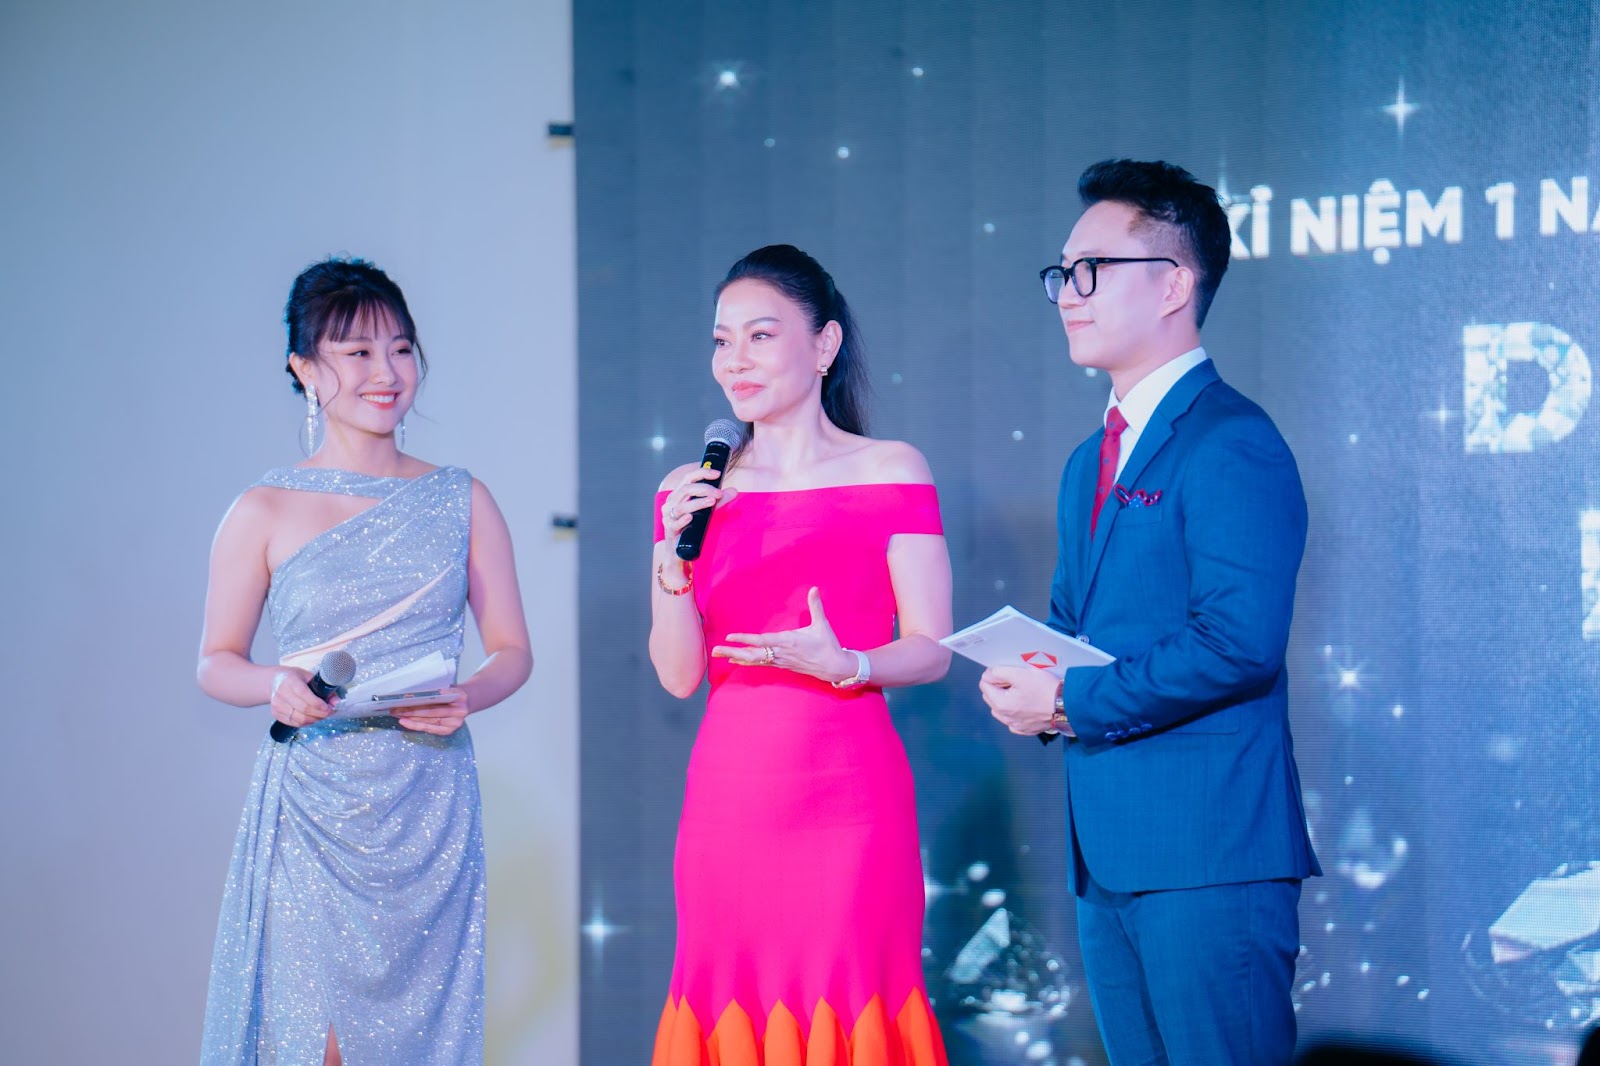 Singer Thu Minh at the event commemorating the 1st anniversary of launching the TUBRR brand